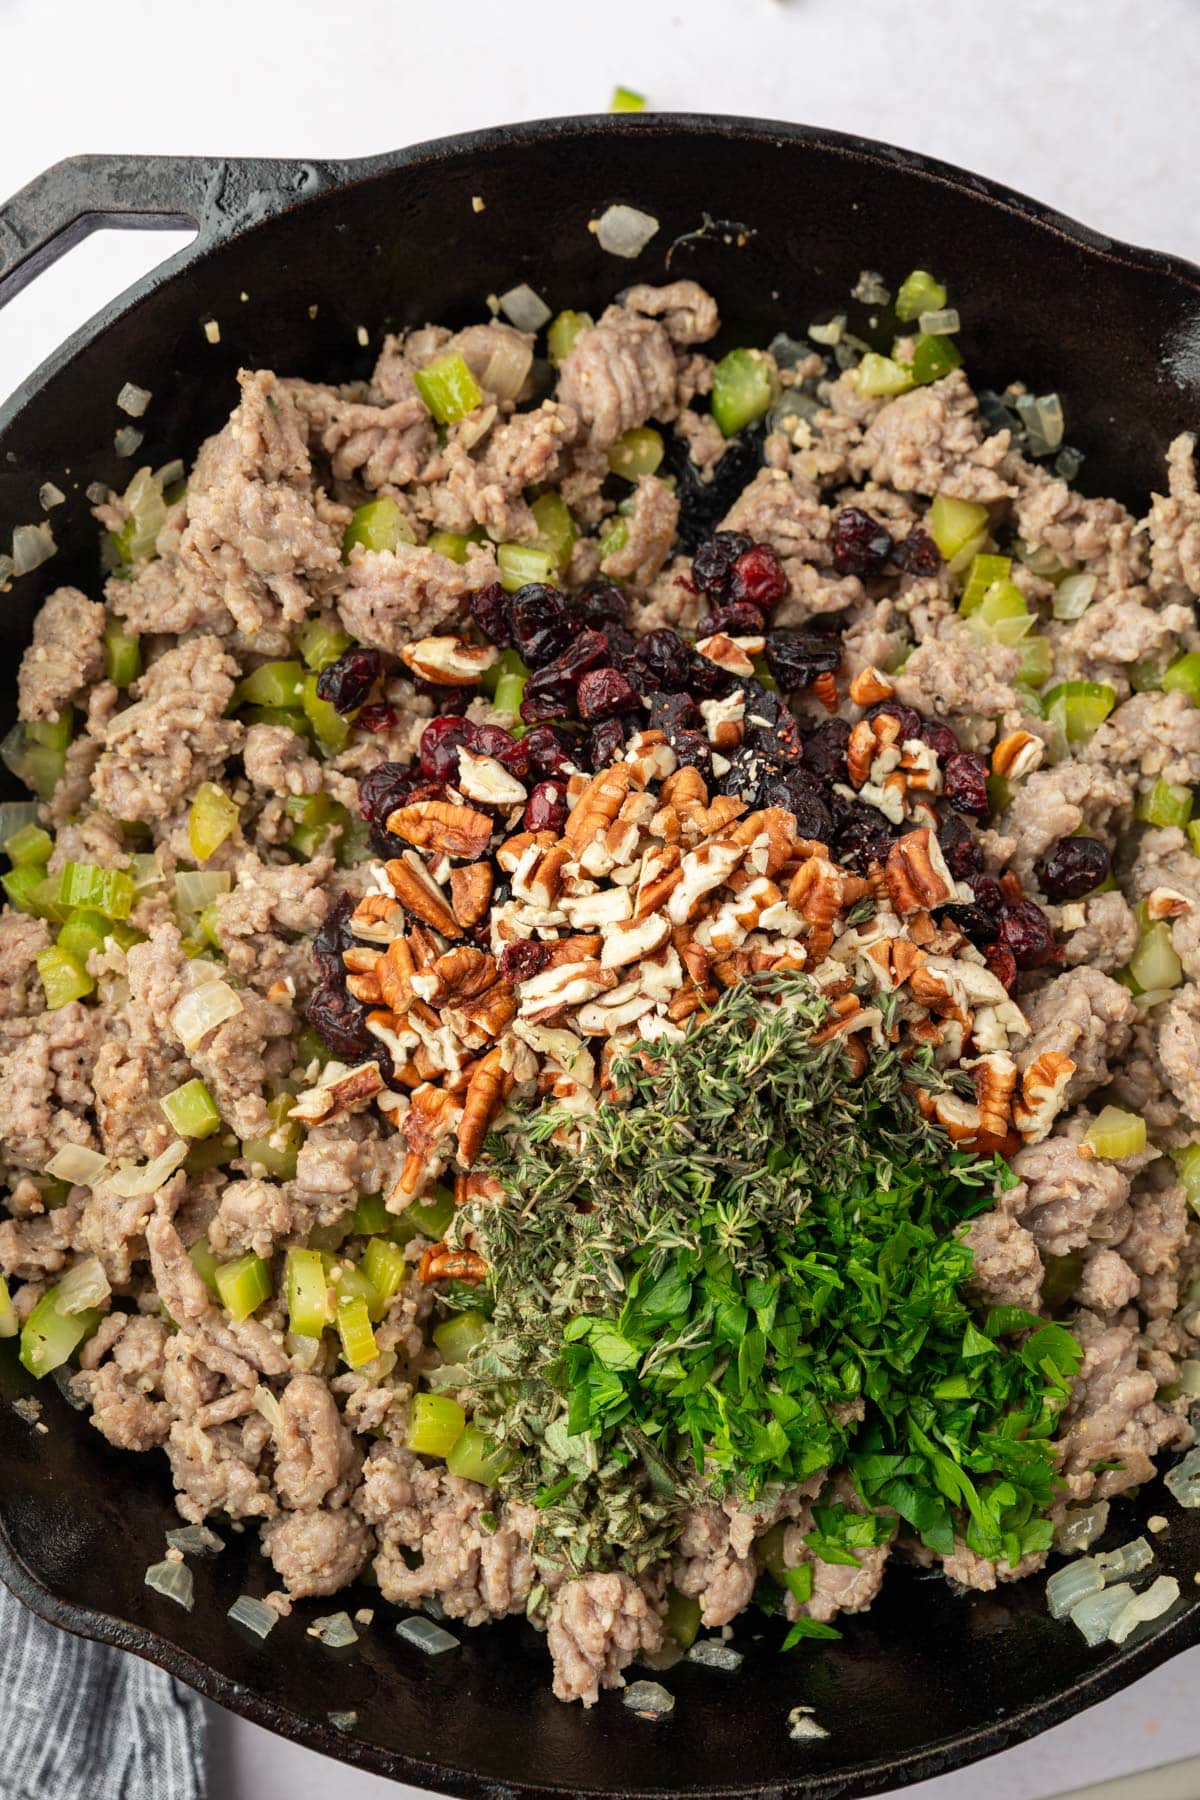 A cast iron skillet filled with Italian sausage, celery, onions, sage, thyme, pecans and cranberries before mixing together.